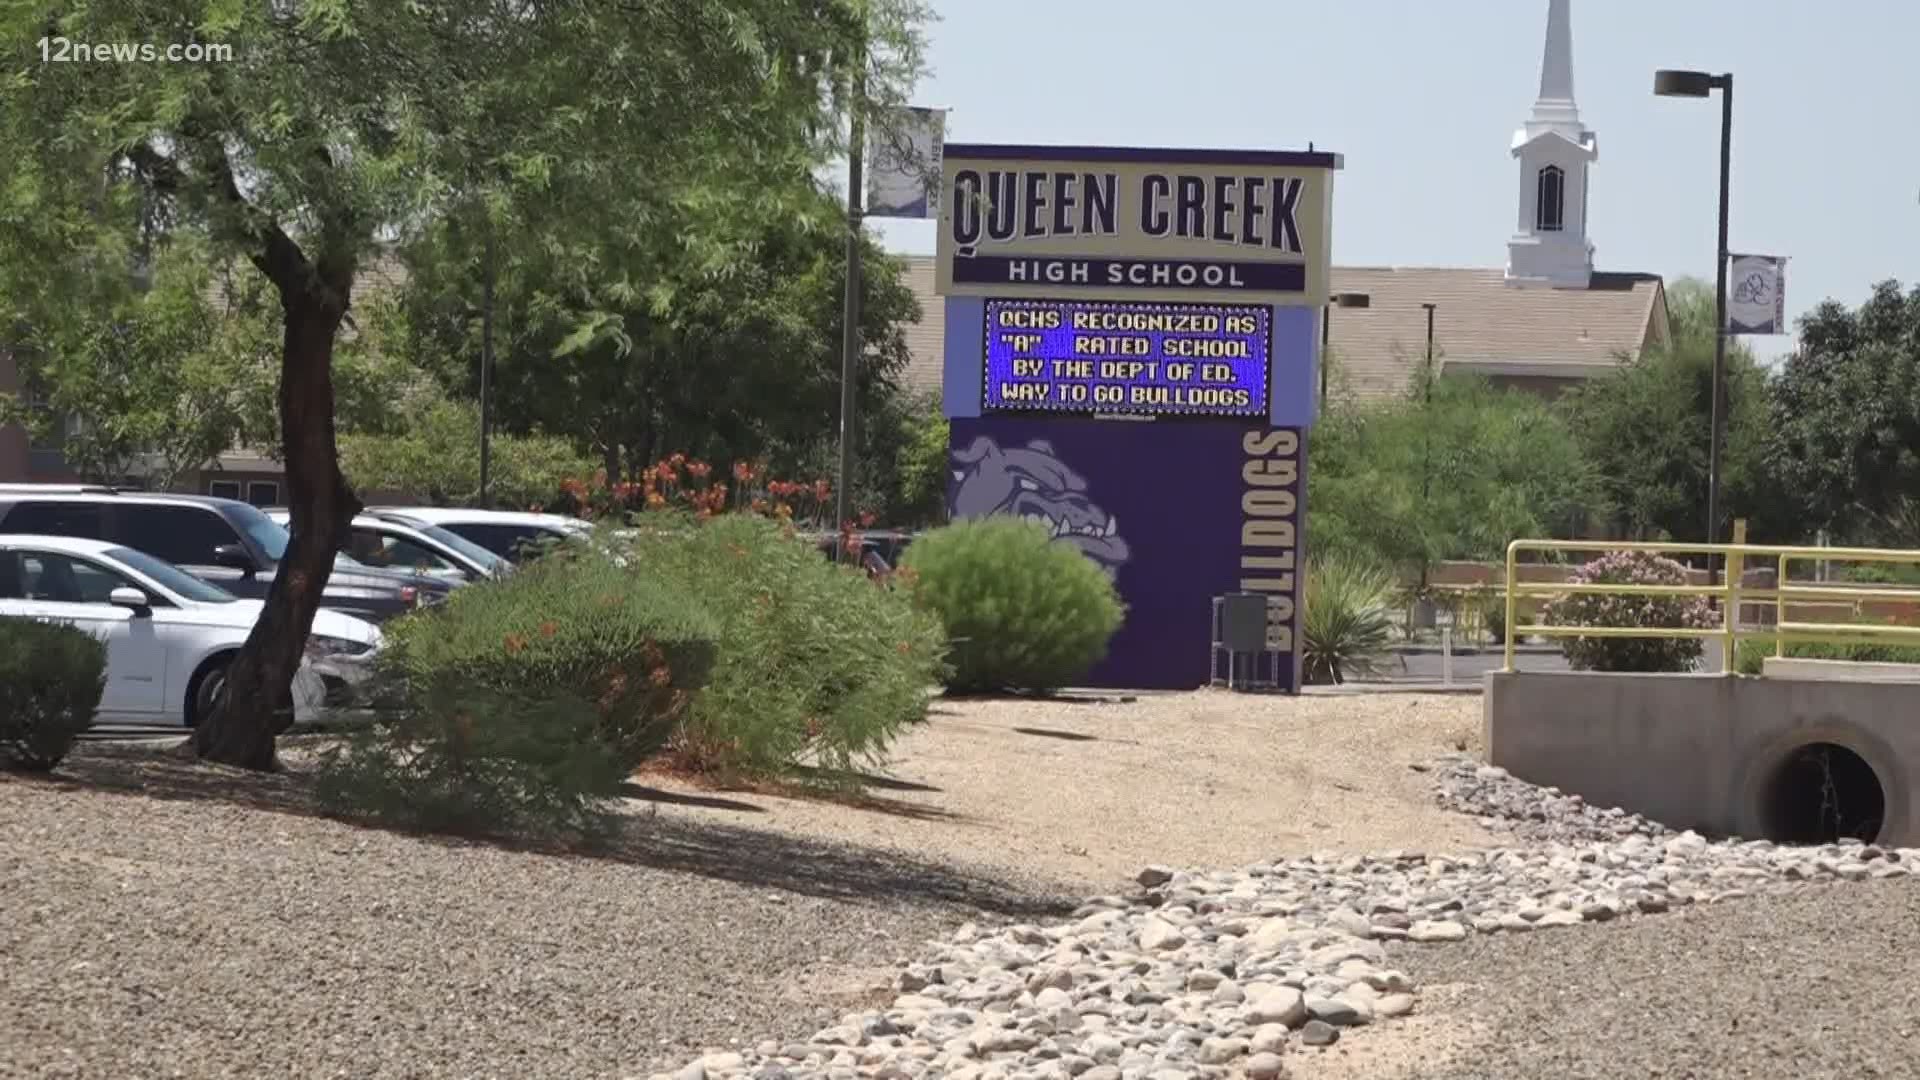 Queen Creek schools are opening on Monday teachers and parents have